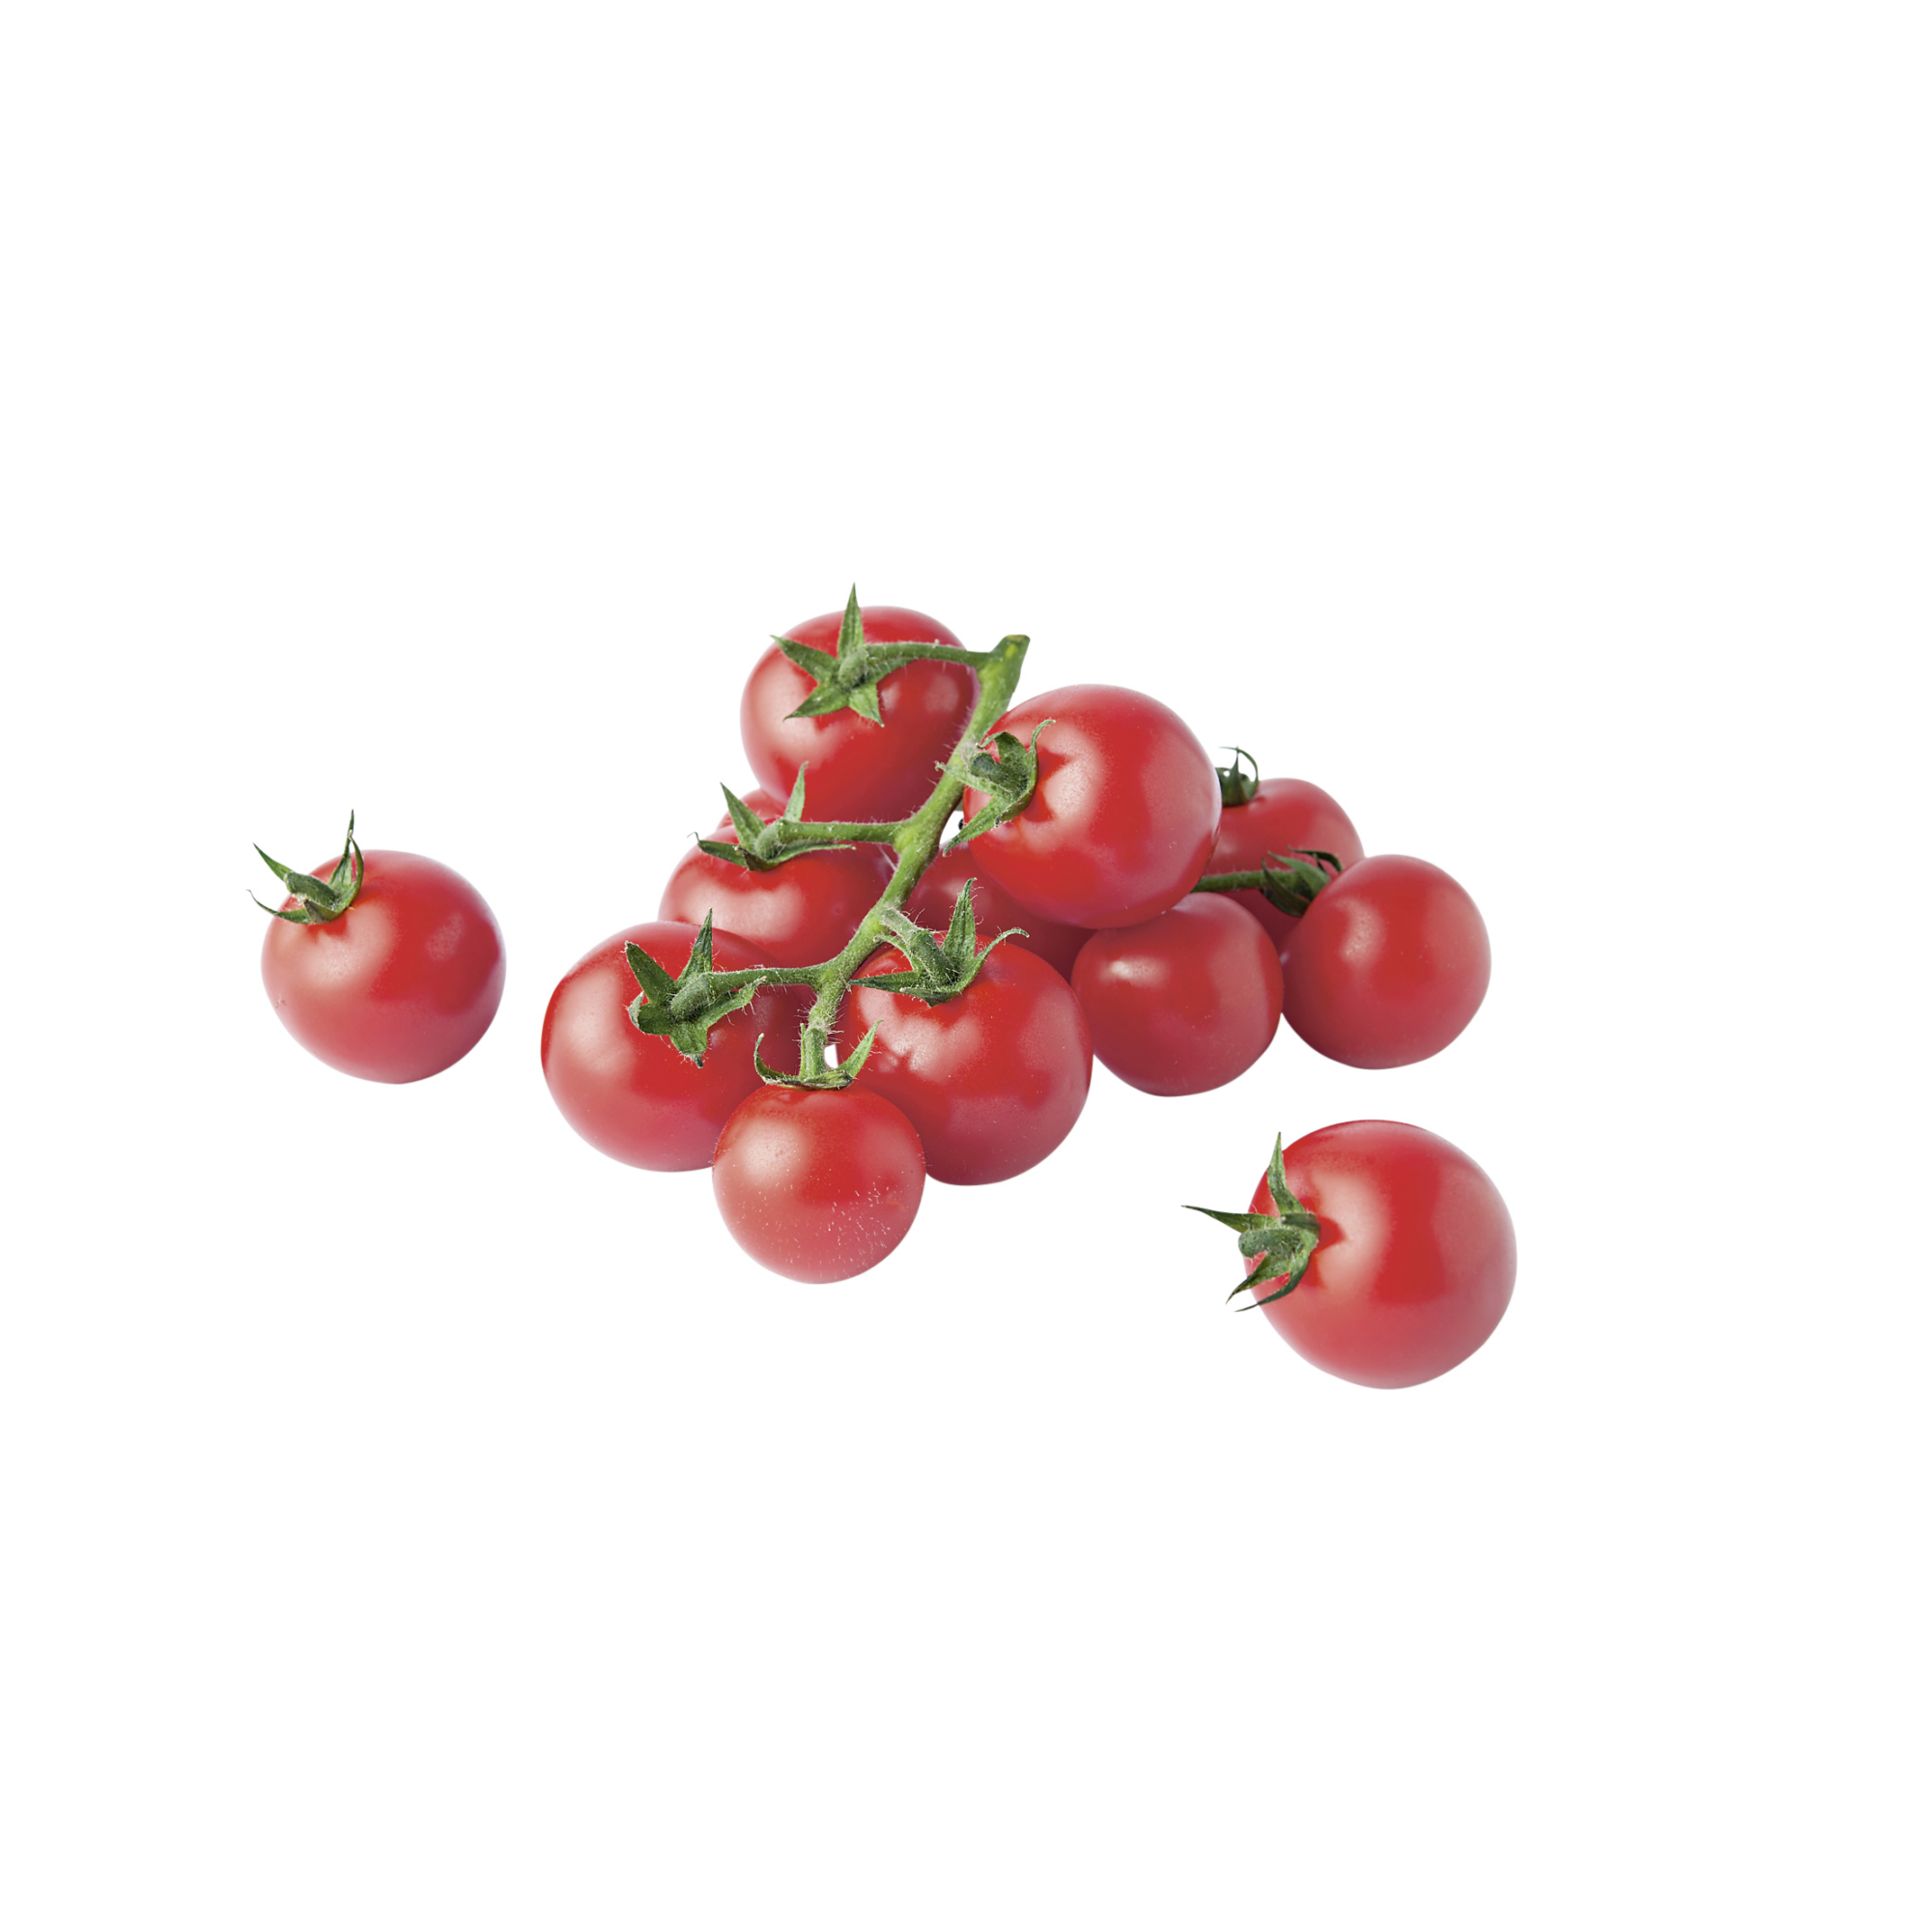 Naturtalent by toom® Bio Veredelte Tomate 'Amoroso', 13 cm Topf + product picture